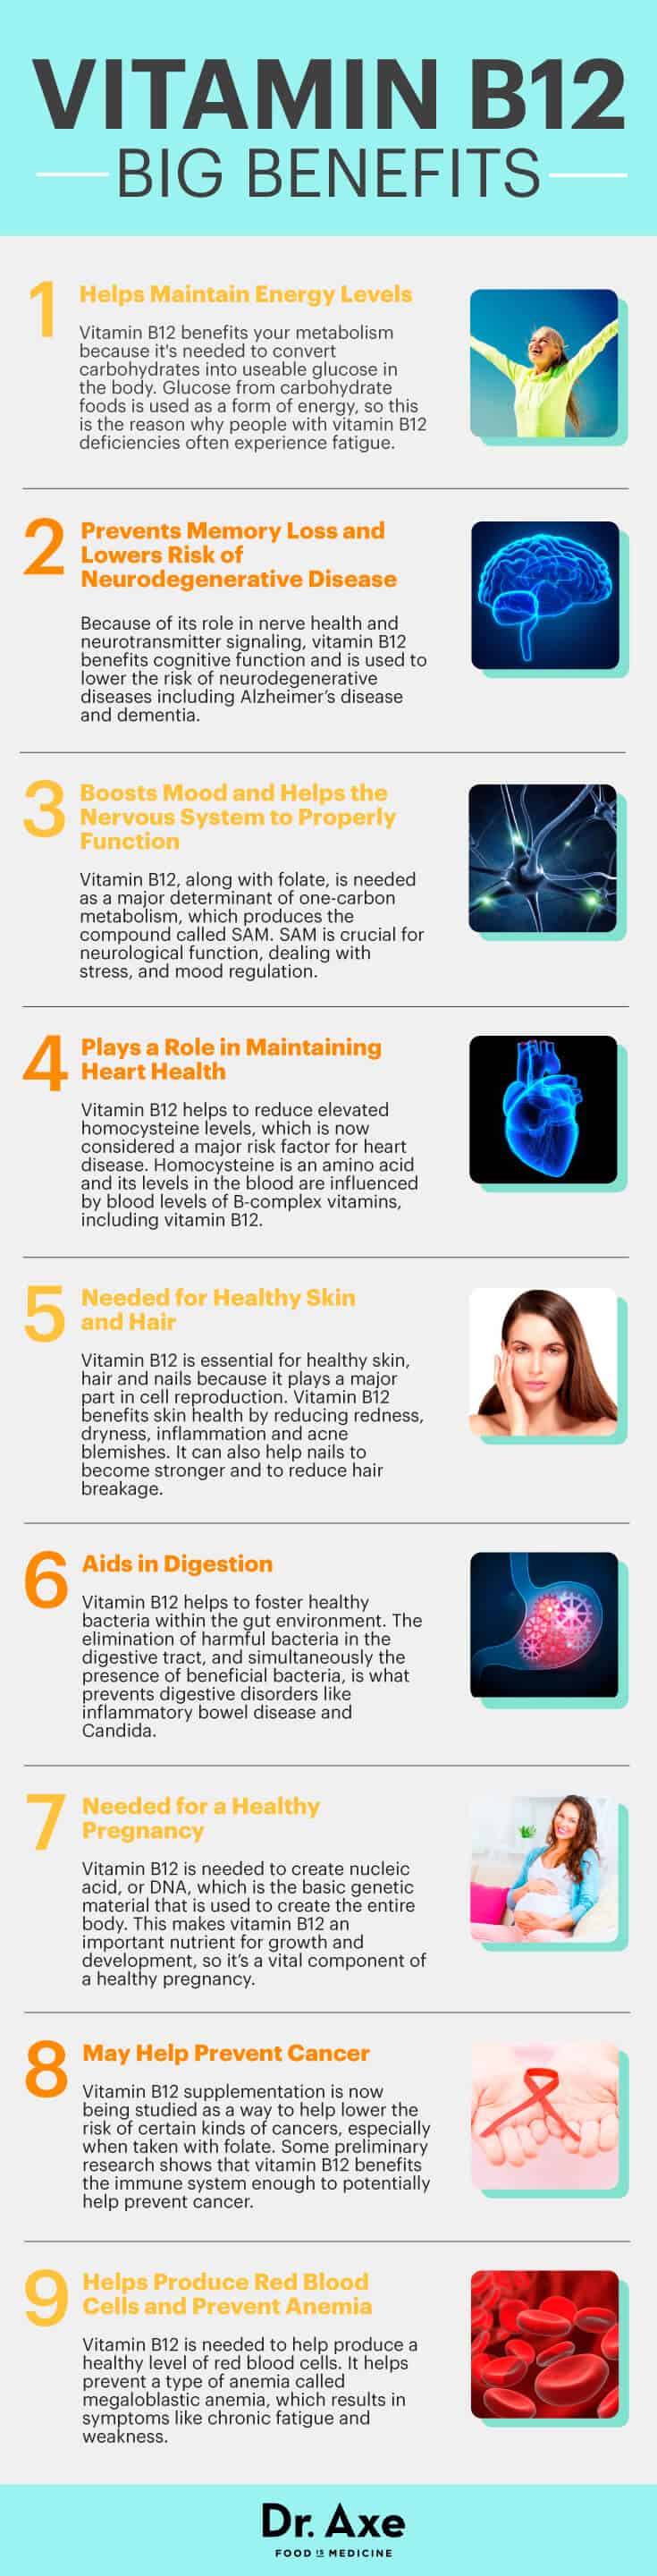 Vitamin B12 Benefits And Deficiency Symptoms Dr Axe